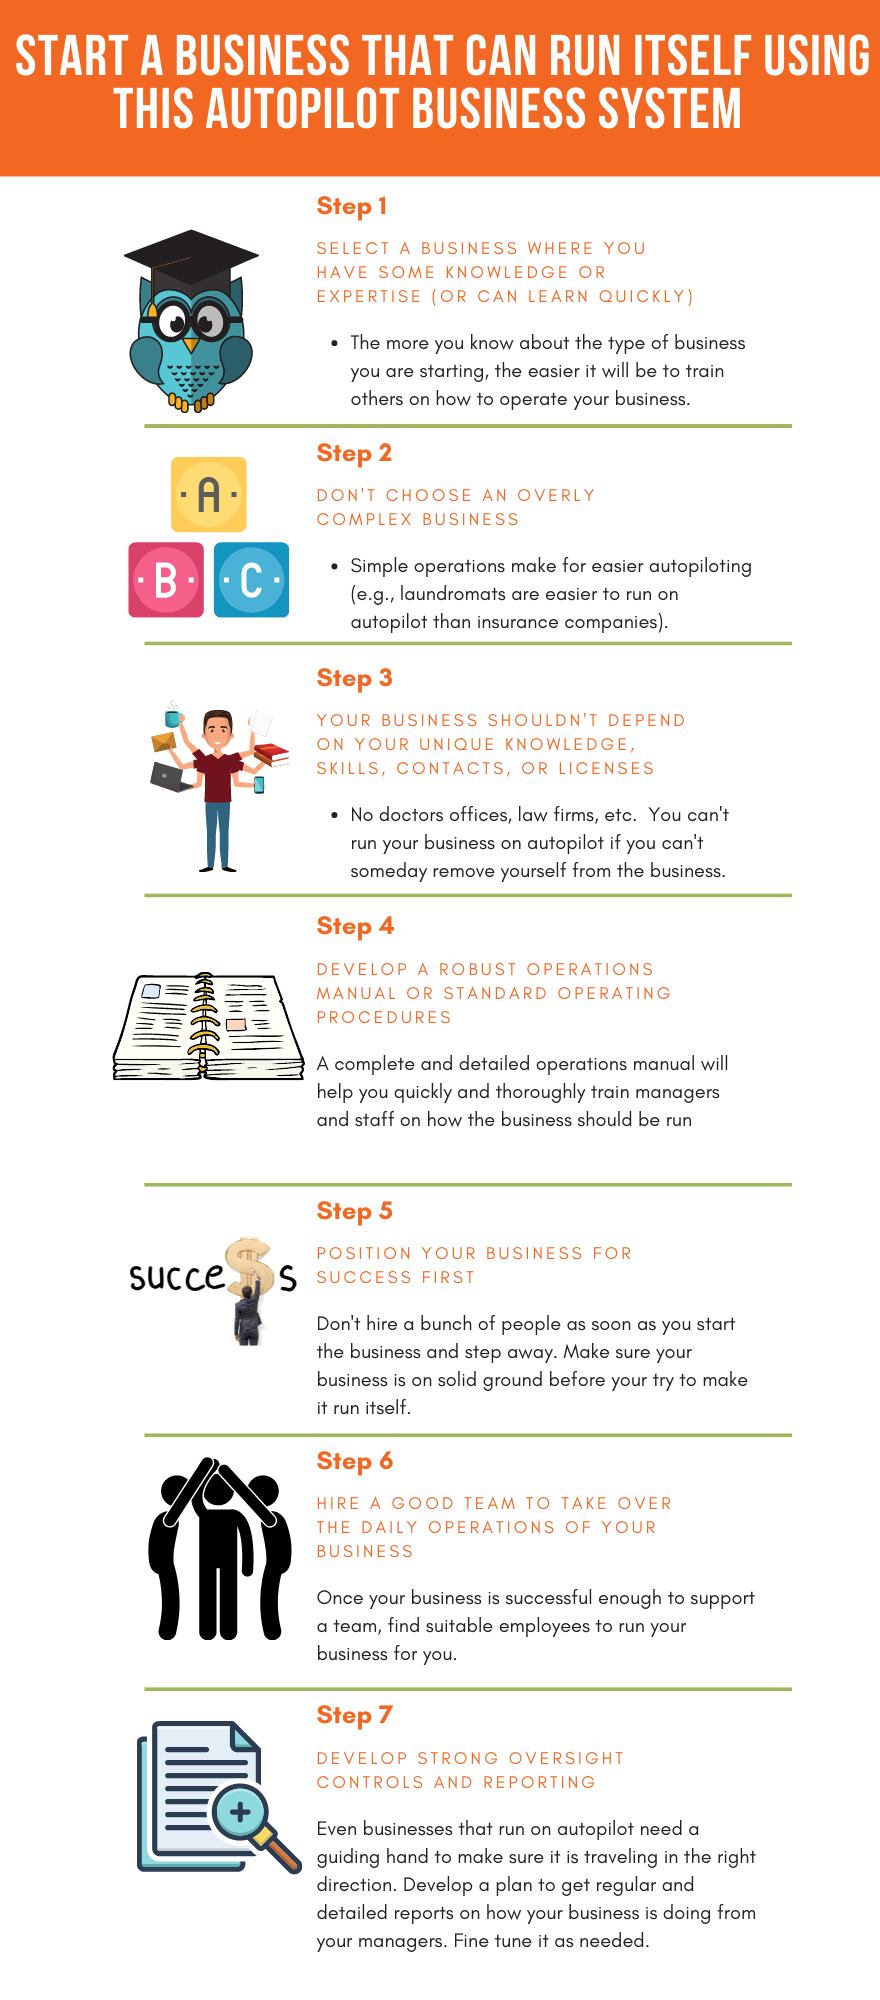 Infographic of Autopilot Business System With Summary of 7 Key Steps 